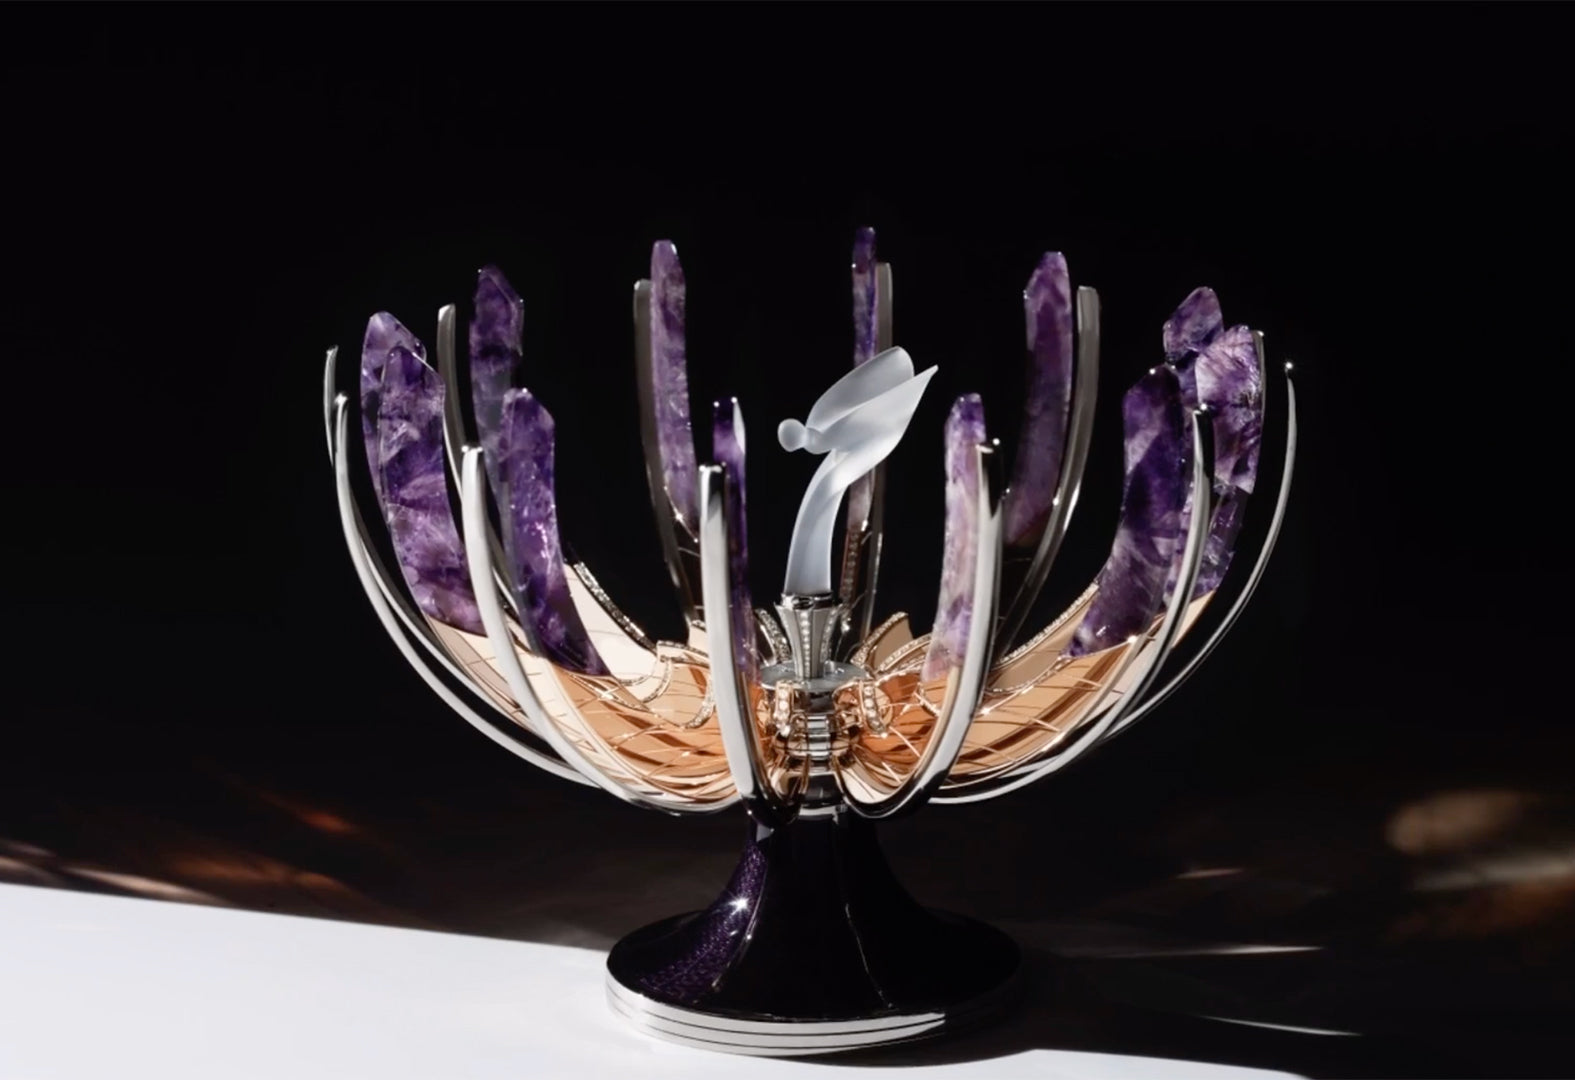 Rolls-Royce Cars and Fabergé Created the Most Spectacular Fabergé Egg